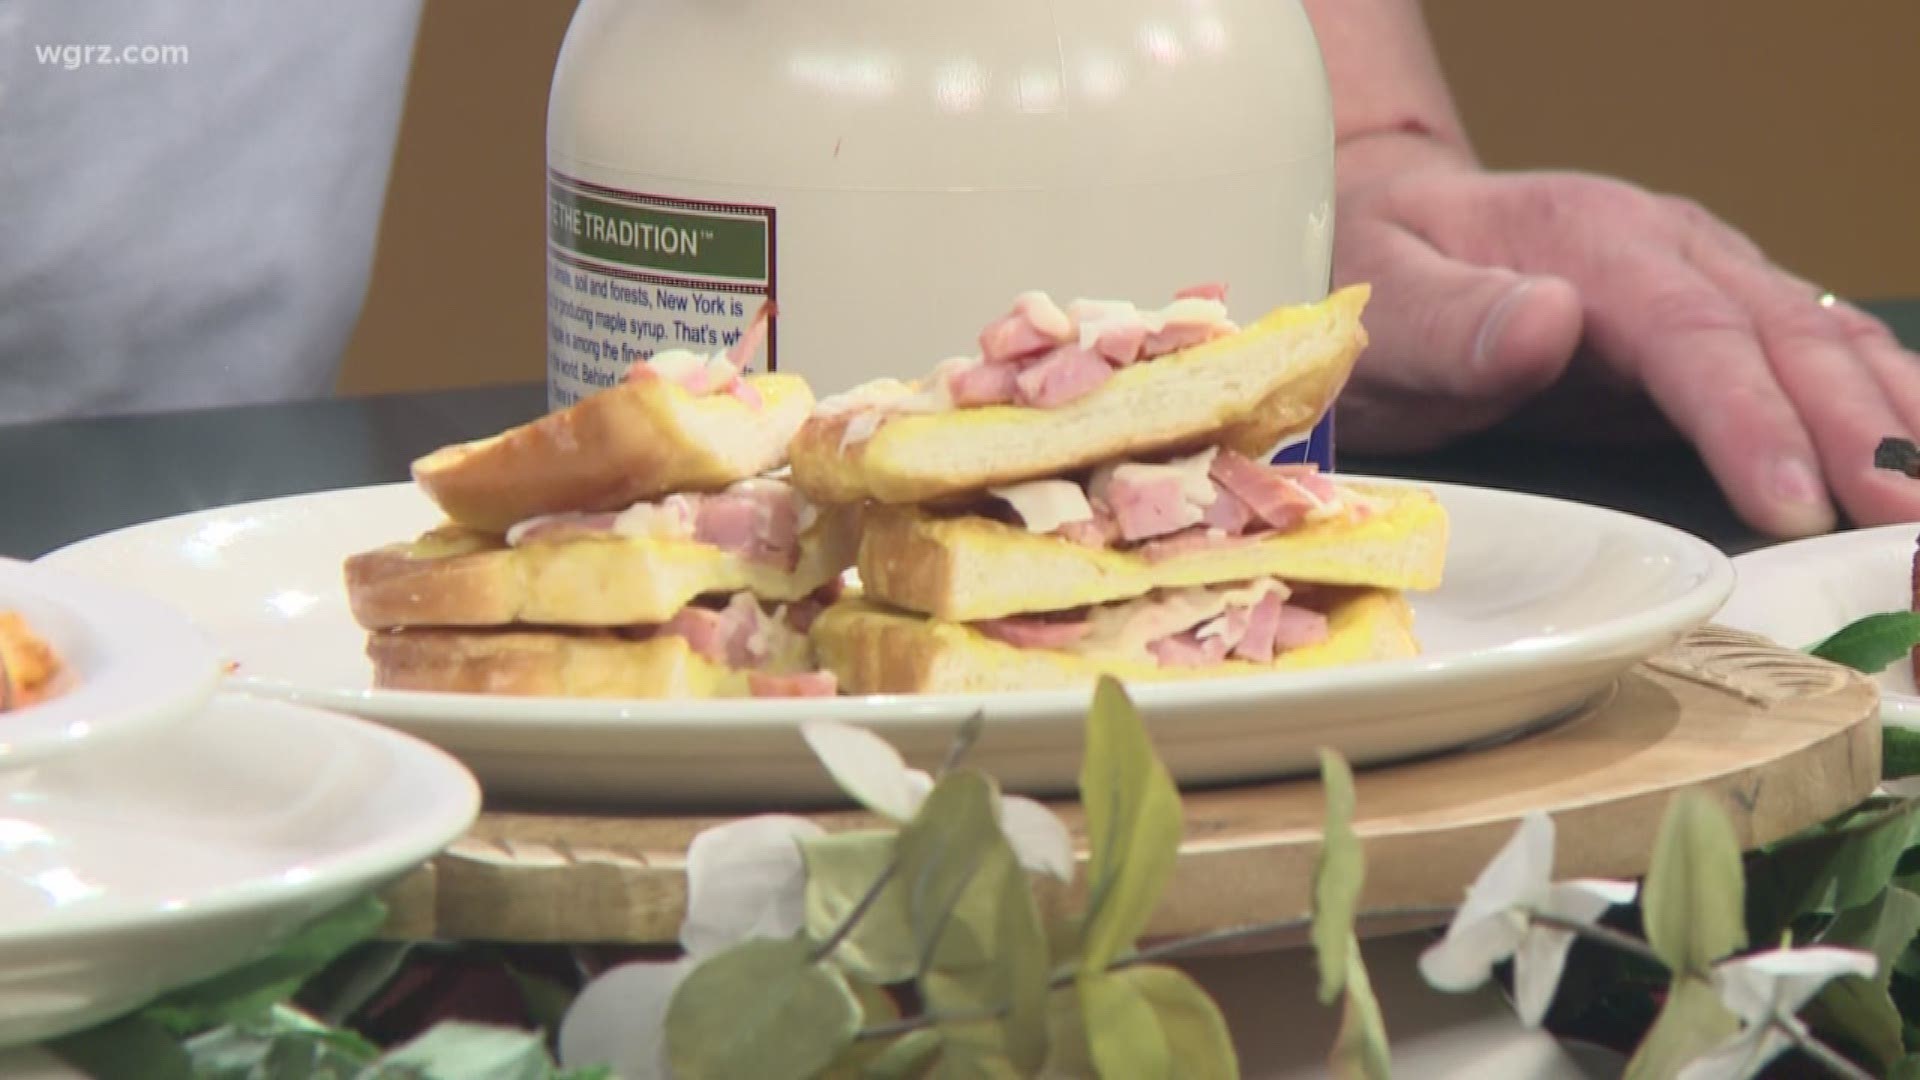 Still have leftover Easter ham? Chef Binks has some great recipes for you.